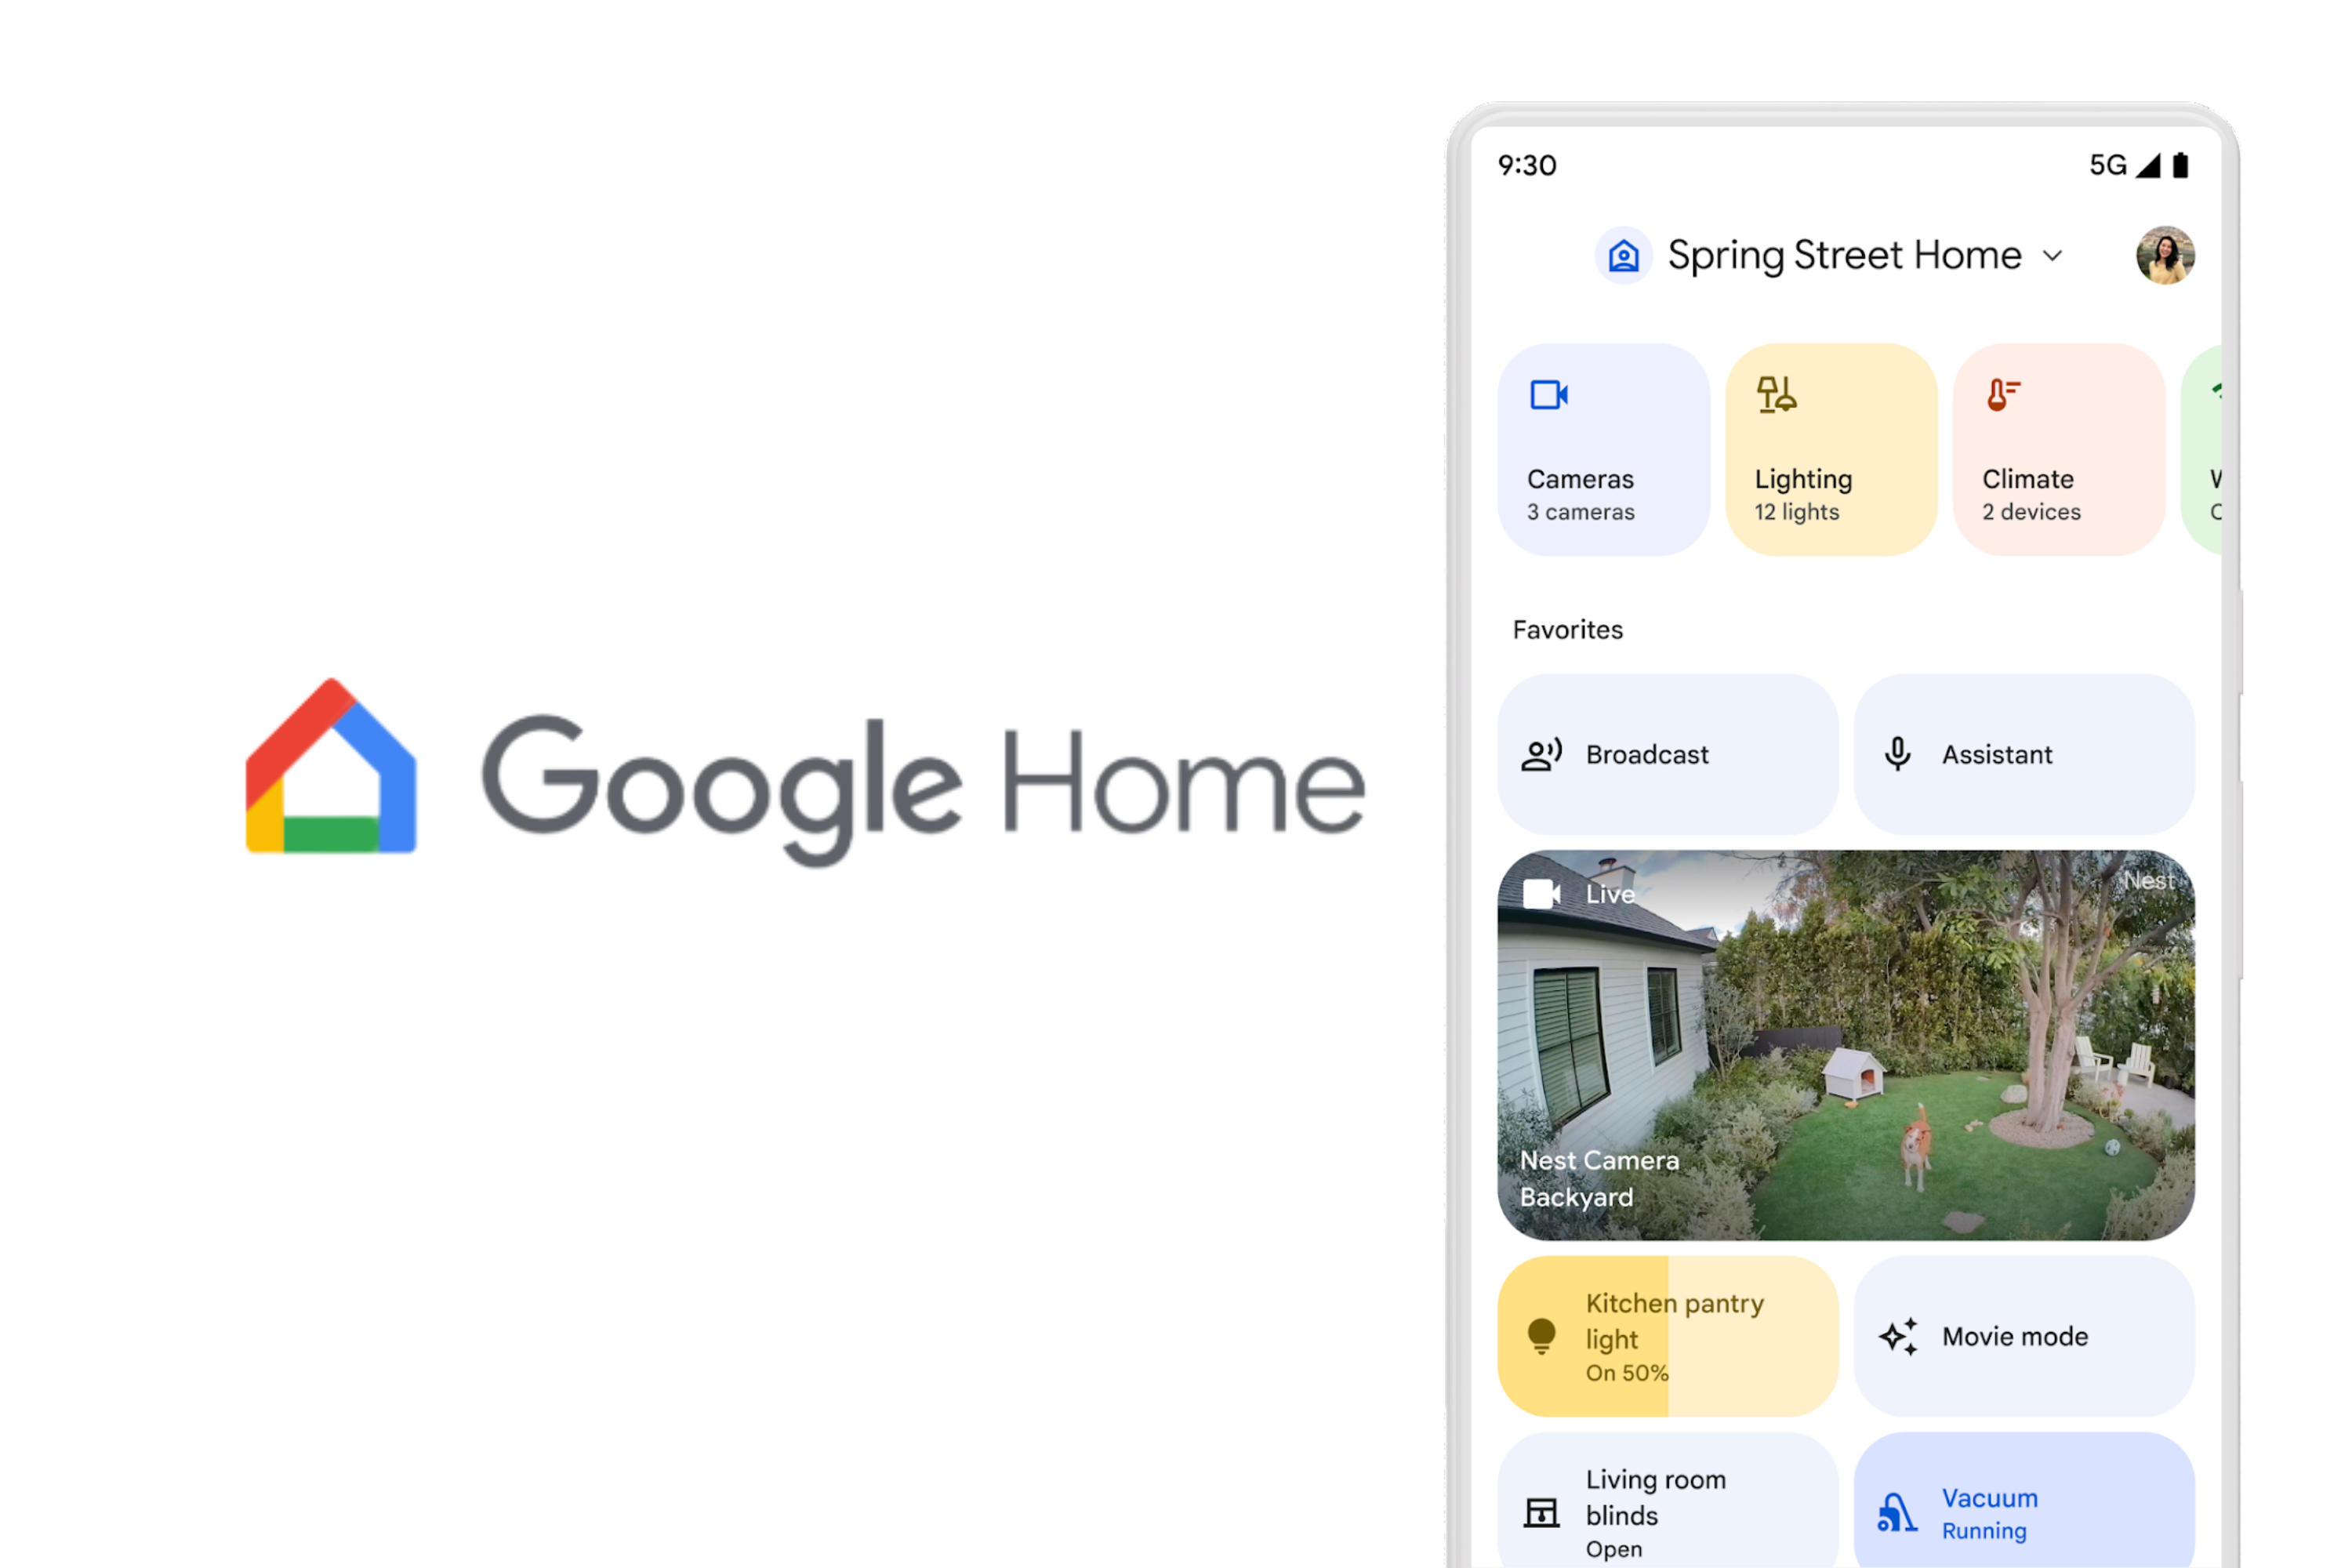 Google Home users can now add Room Lights to the Home panel and Favorites tab